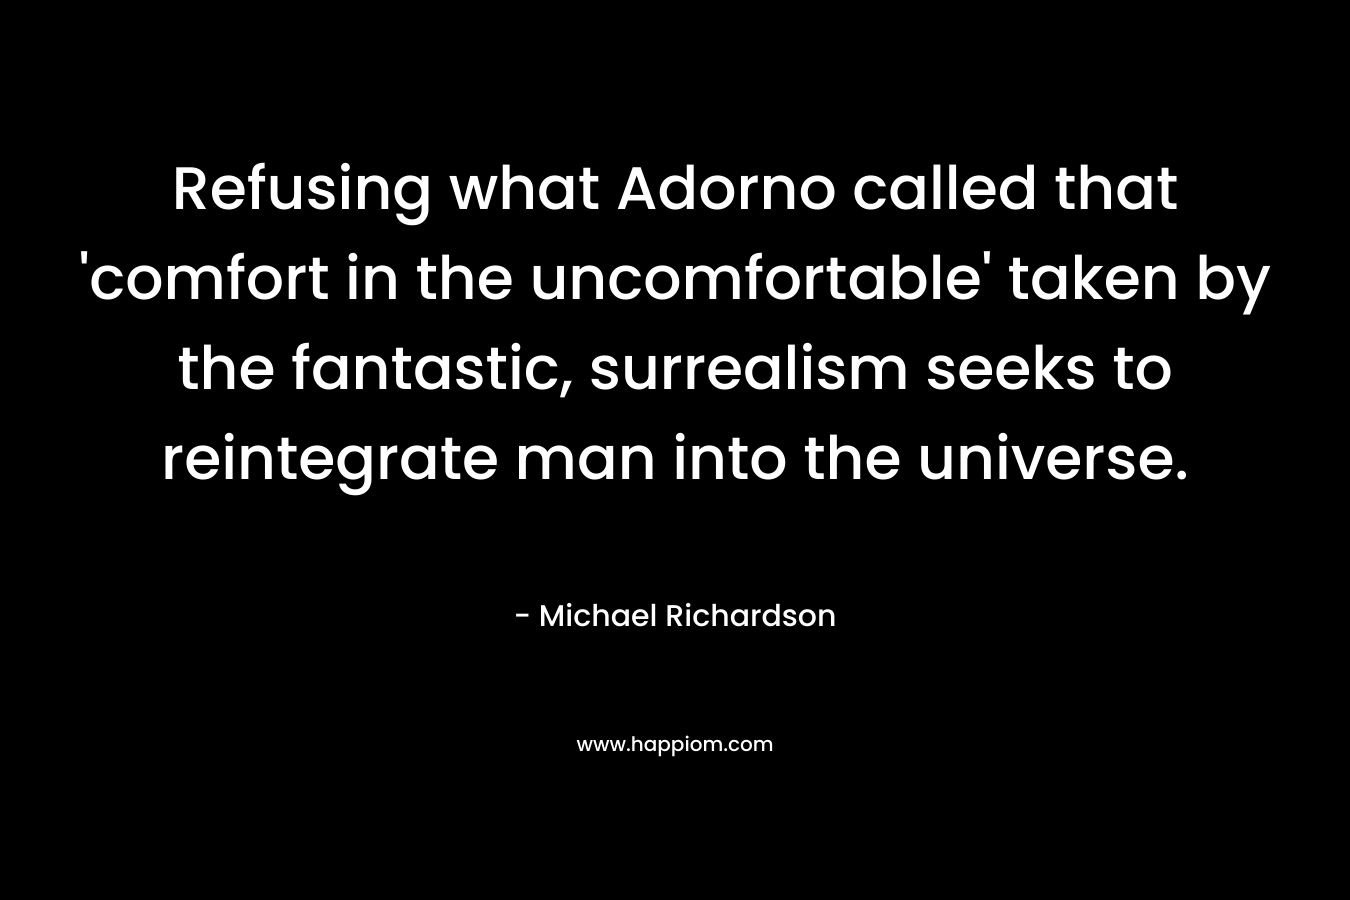 Refusing what Adorno called that 'comfort in the uncomfortable' taken by the fantastic, surrealism seeks to reintegrate man into the universe.